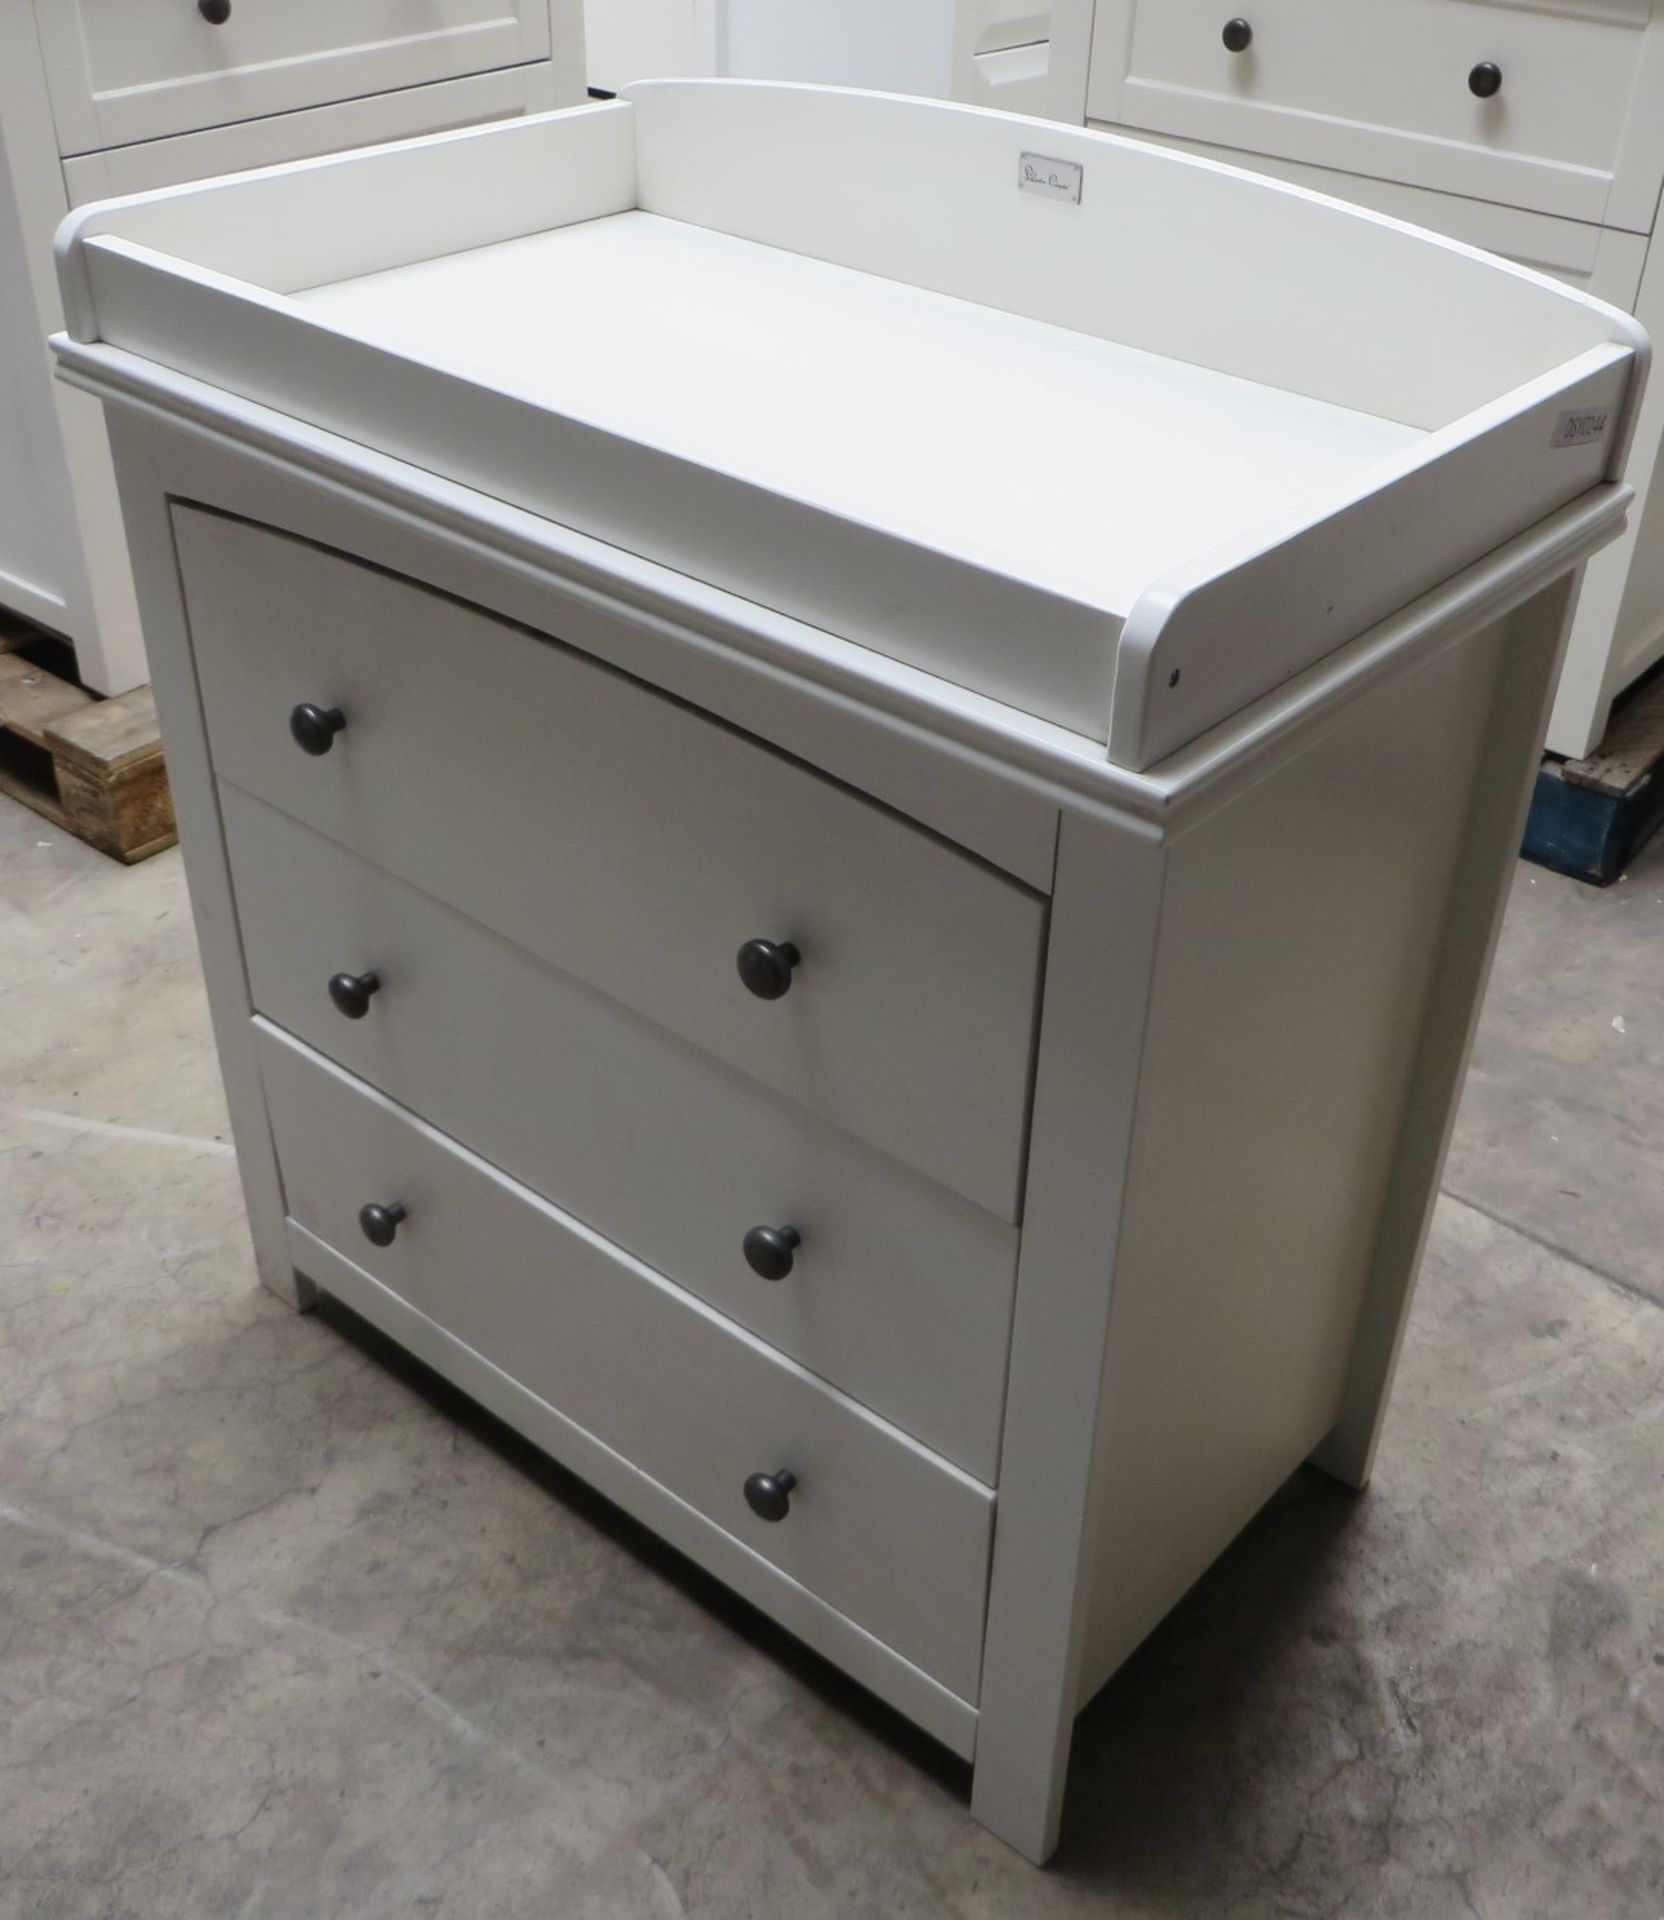 1 x Silver Cross Ashby-Style Combination Changer And Dresser - Nursery Furniture - 88x52x97.5cm - - Image 14 of 19